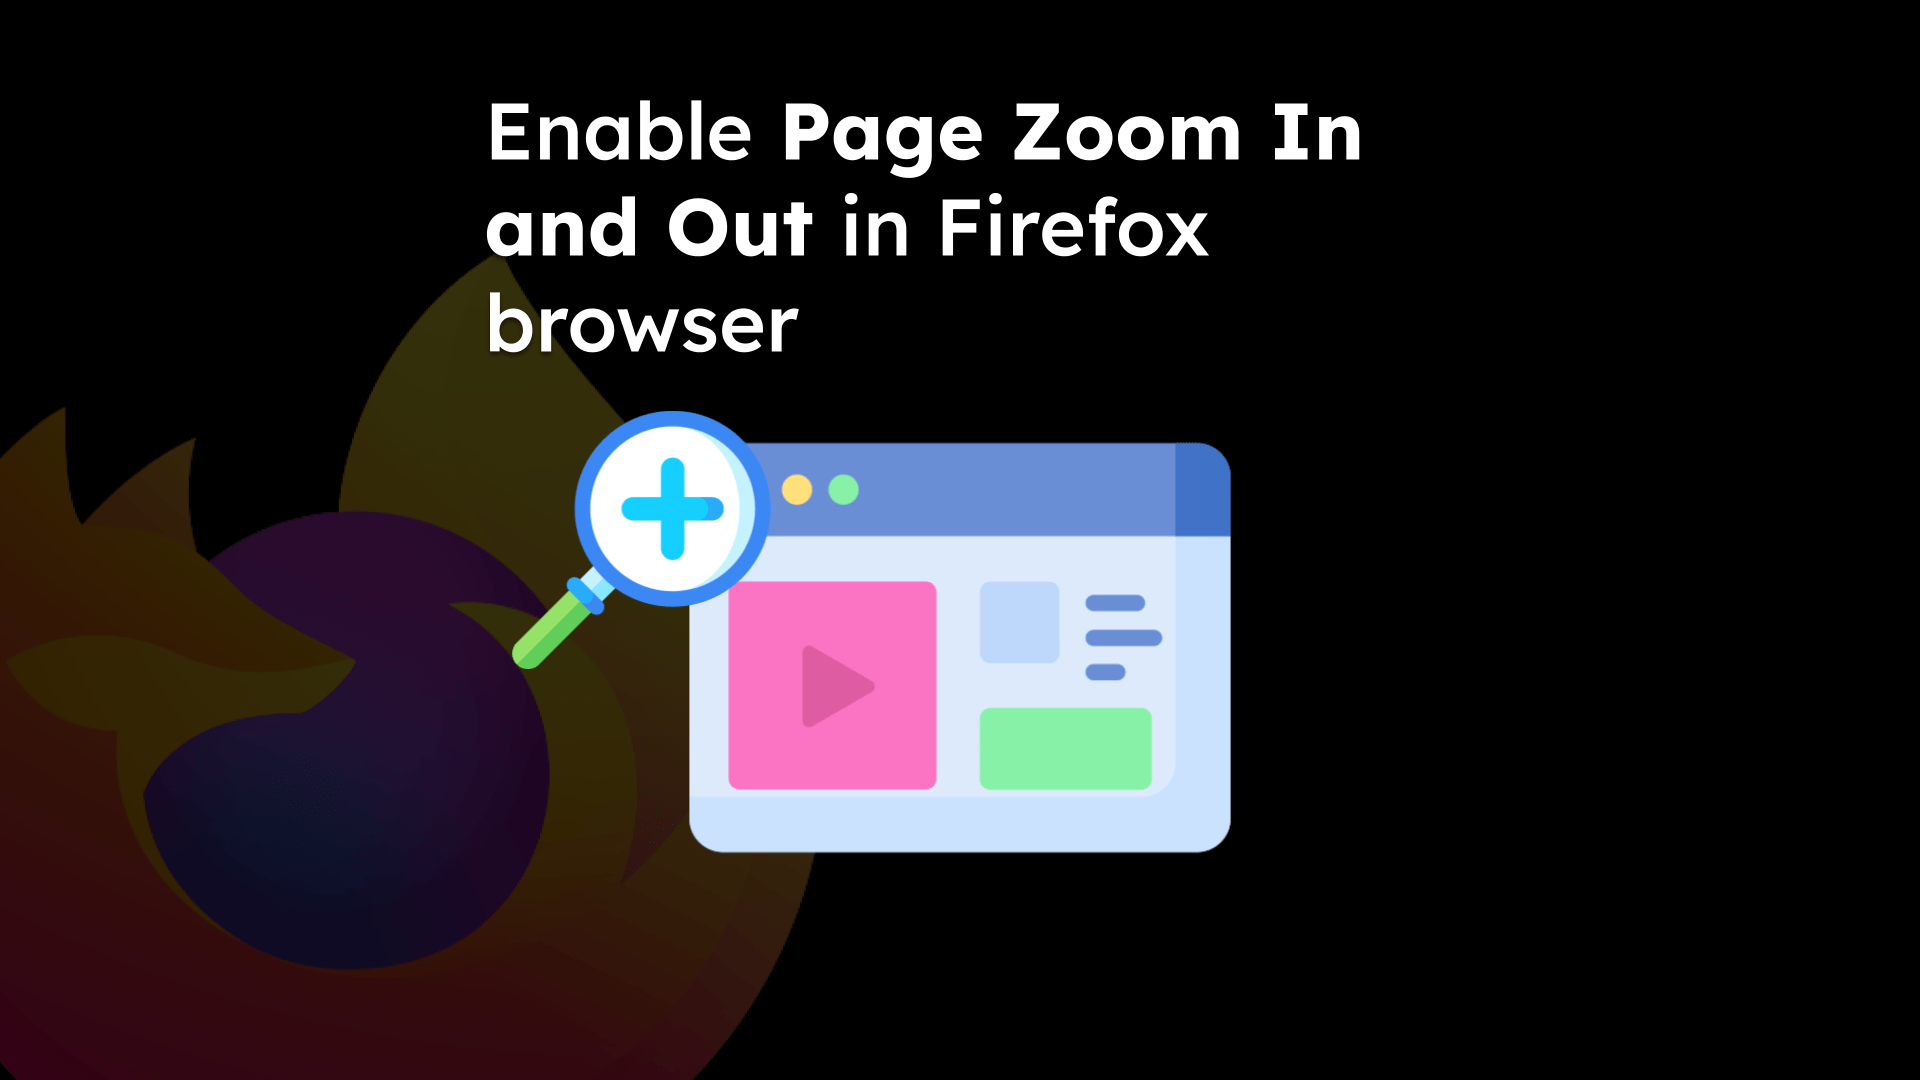 Enable Page Zooming In and Out in Firefox browser